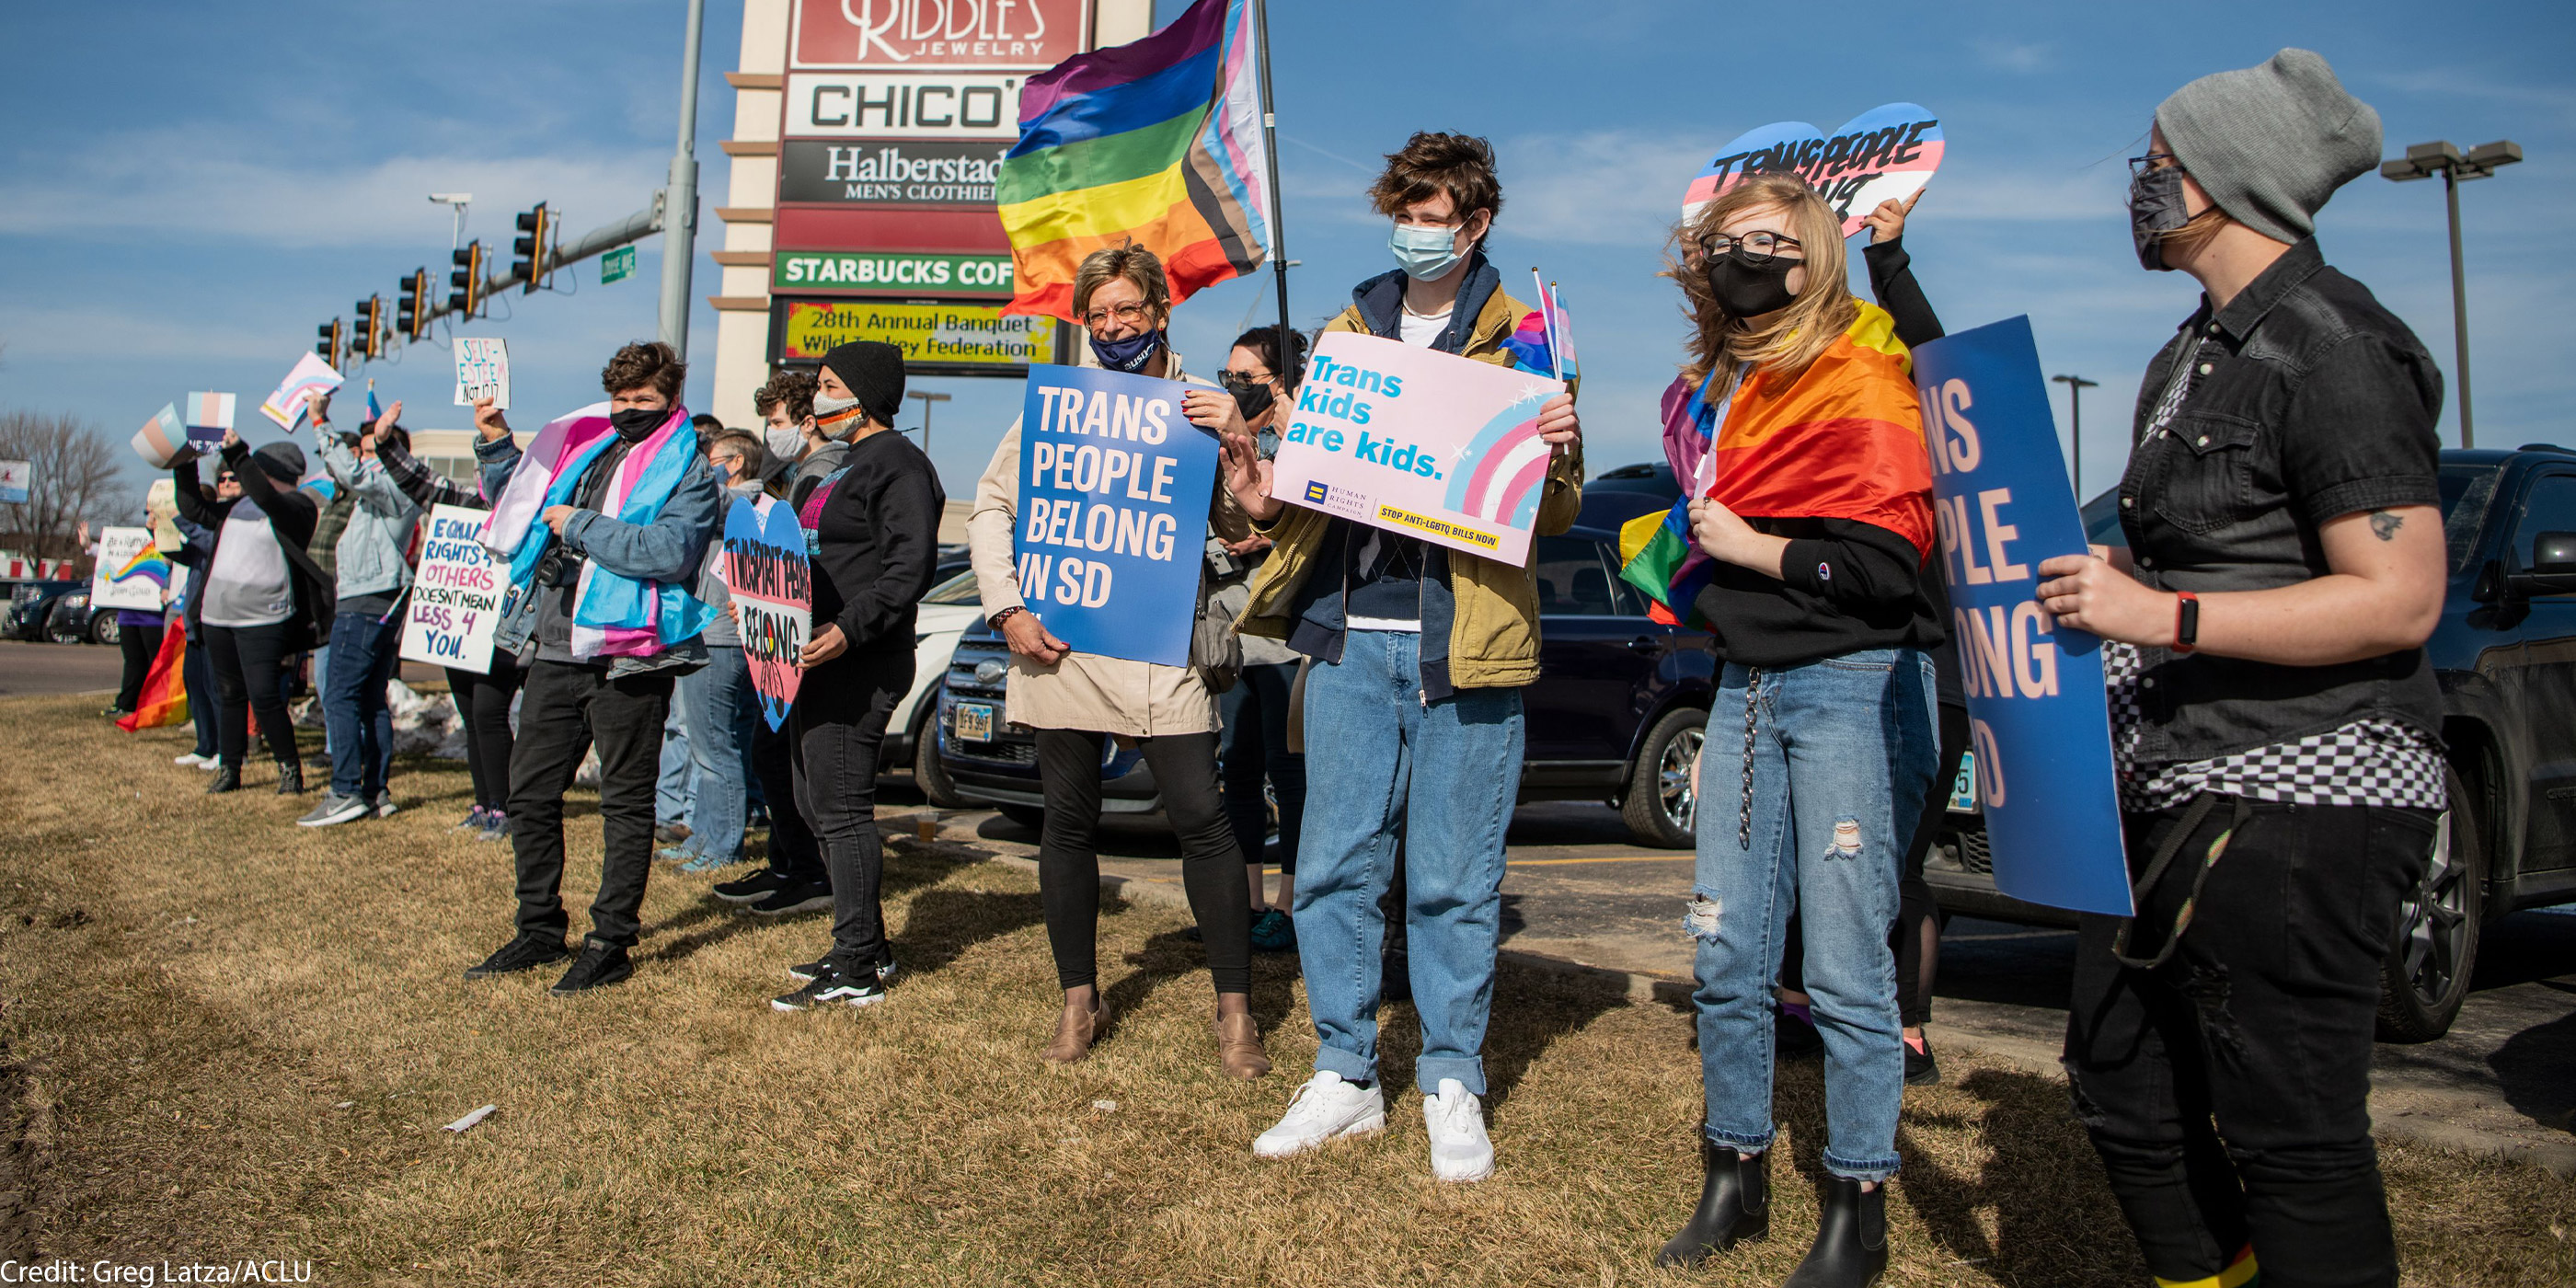 Protestors holding an ACLU "Trans People Belong" poster and "trans kids are kids" poster at a trans rights rally in South Dakota.